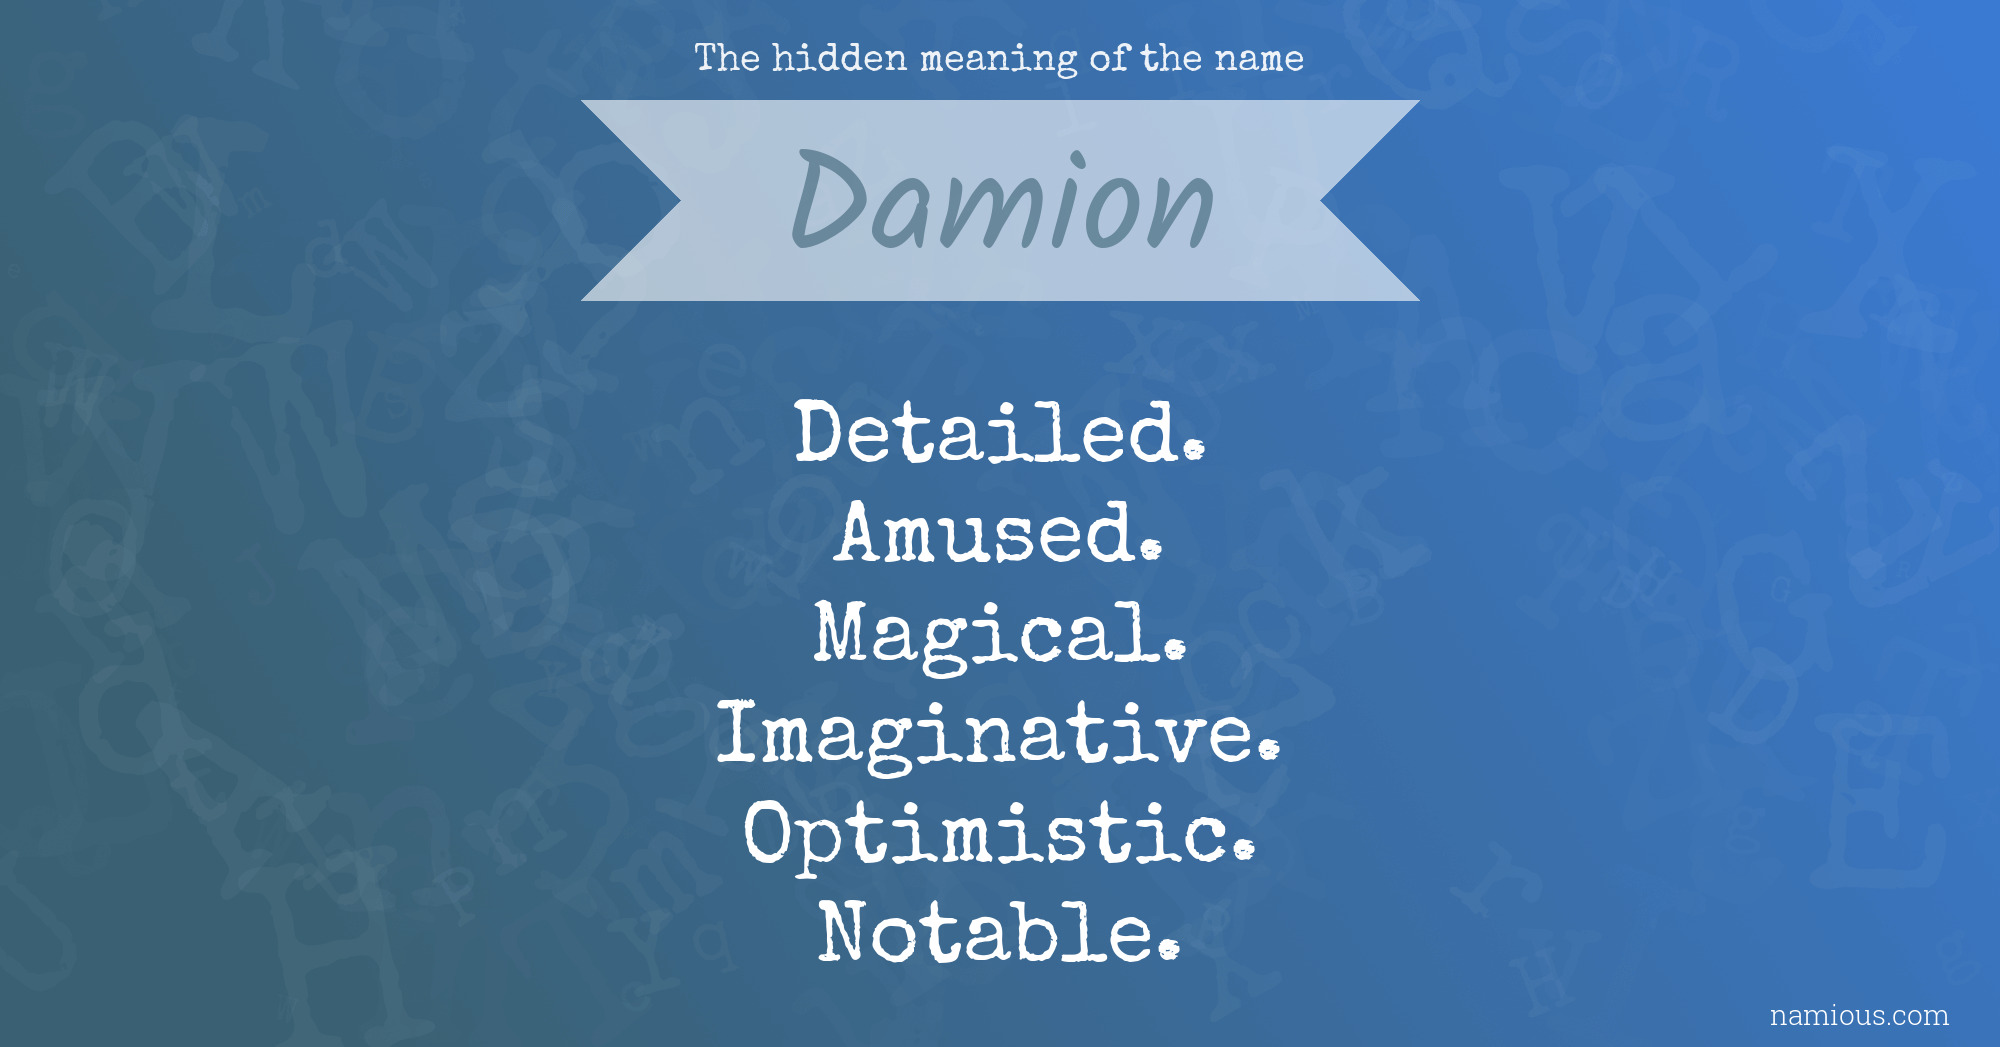 The hidden meaning of the name Damion